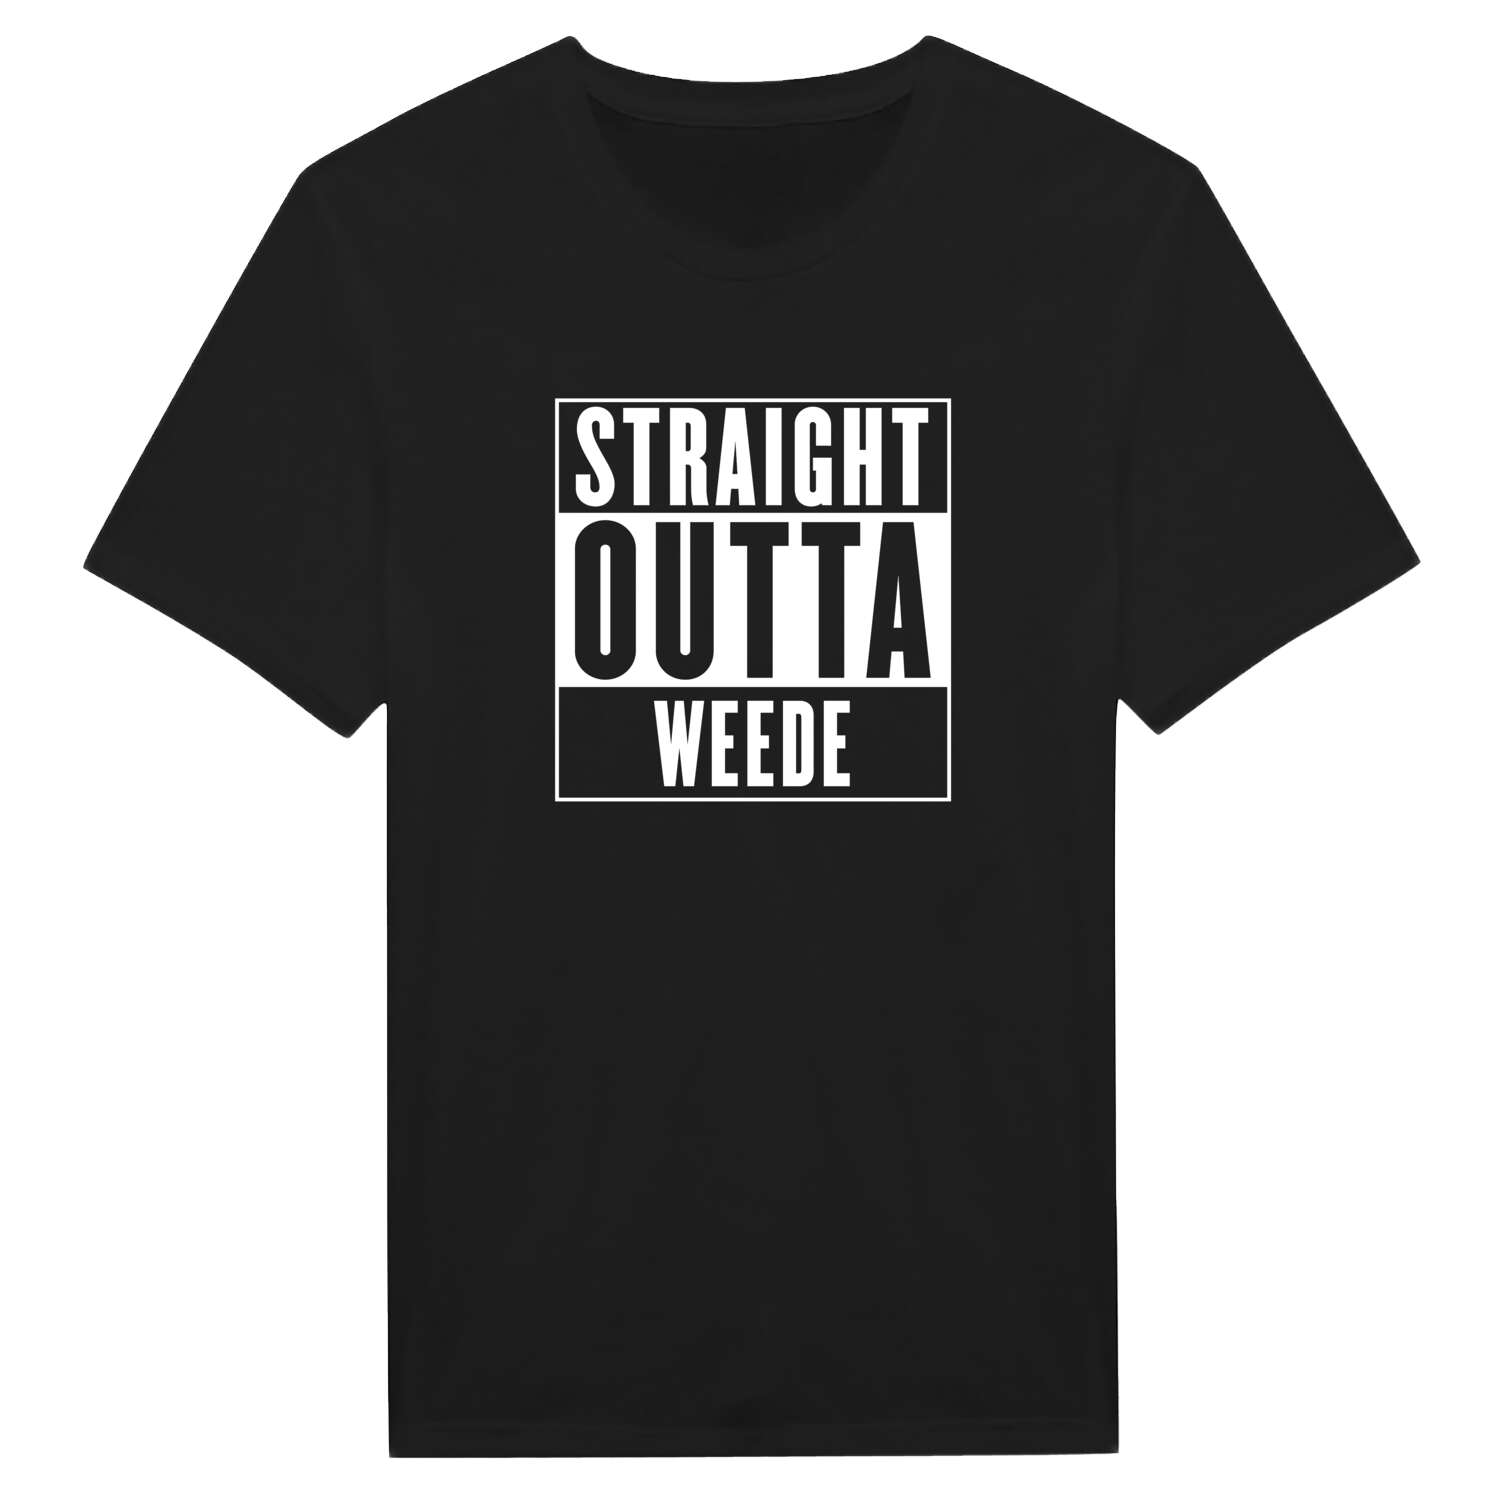 Weede T-Shirt »Straight Outta«